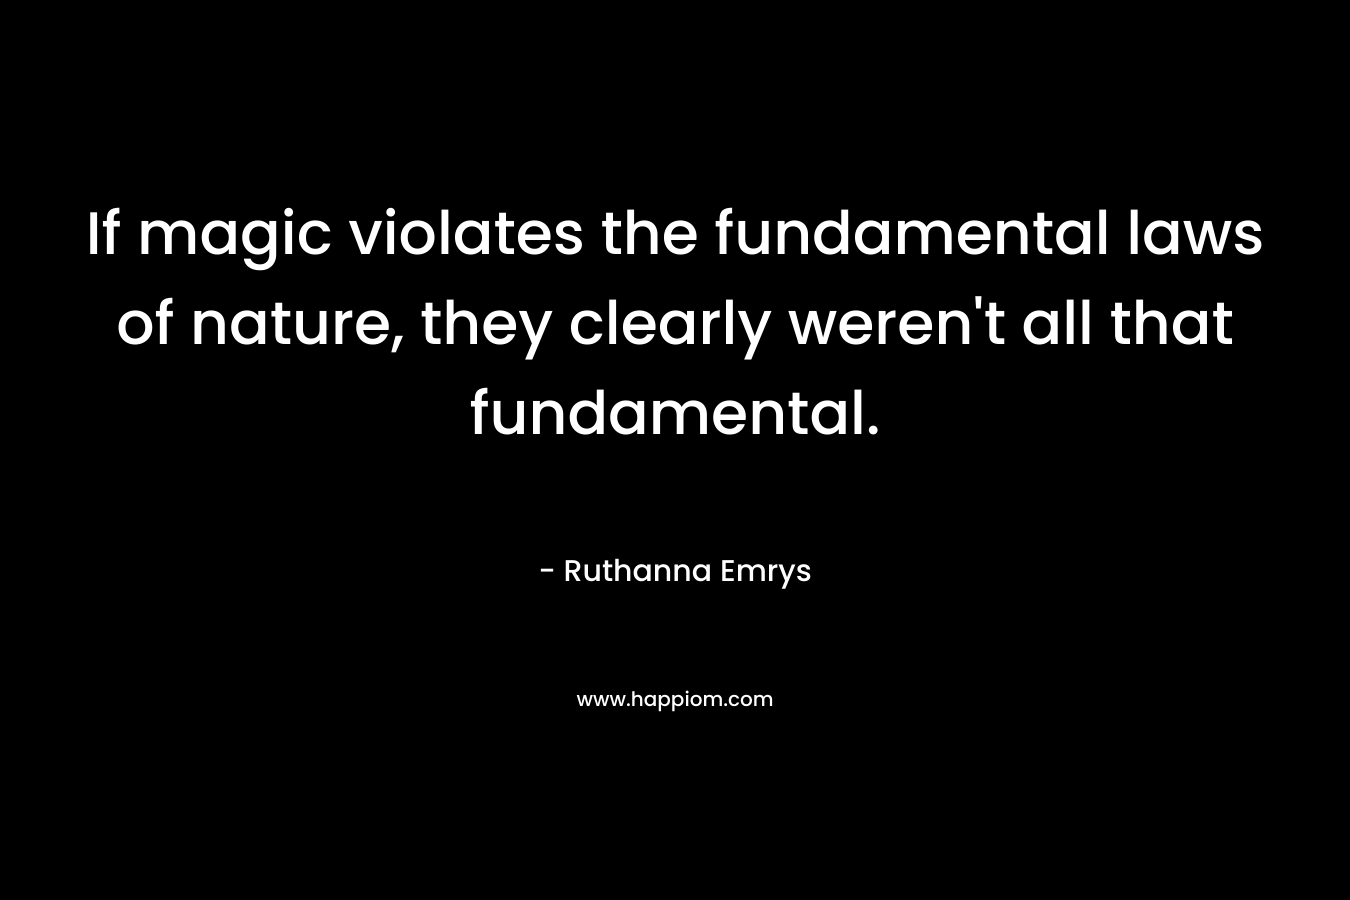 If magic violates the fundamental laws of nature, they clearly weren't all that fundamental.